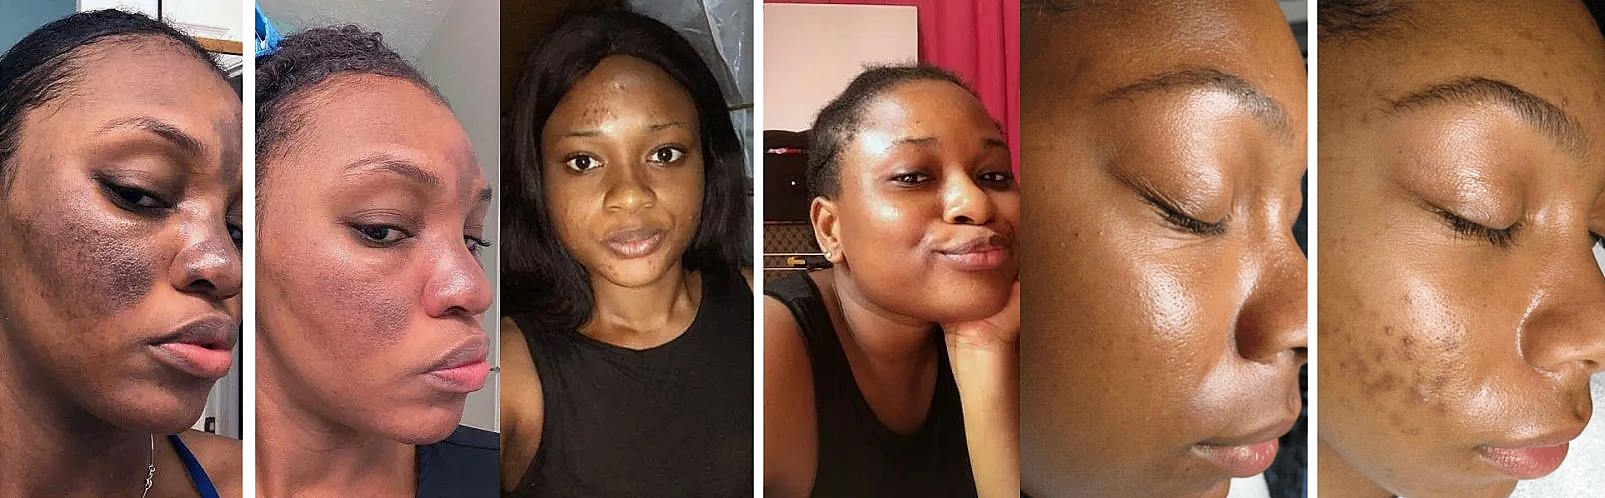 hyperpigmentation kojic acid soap before and after photos 